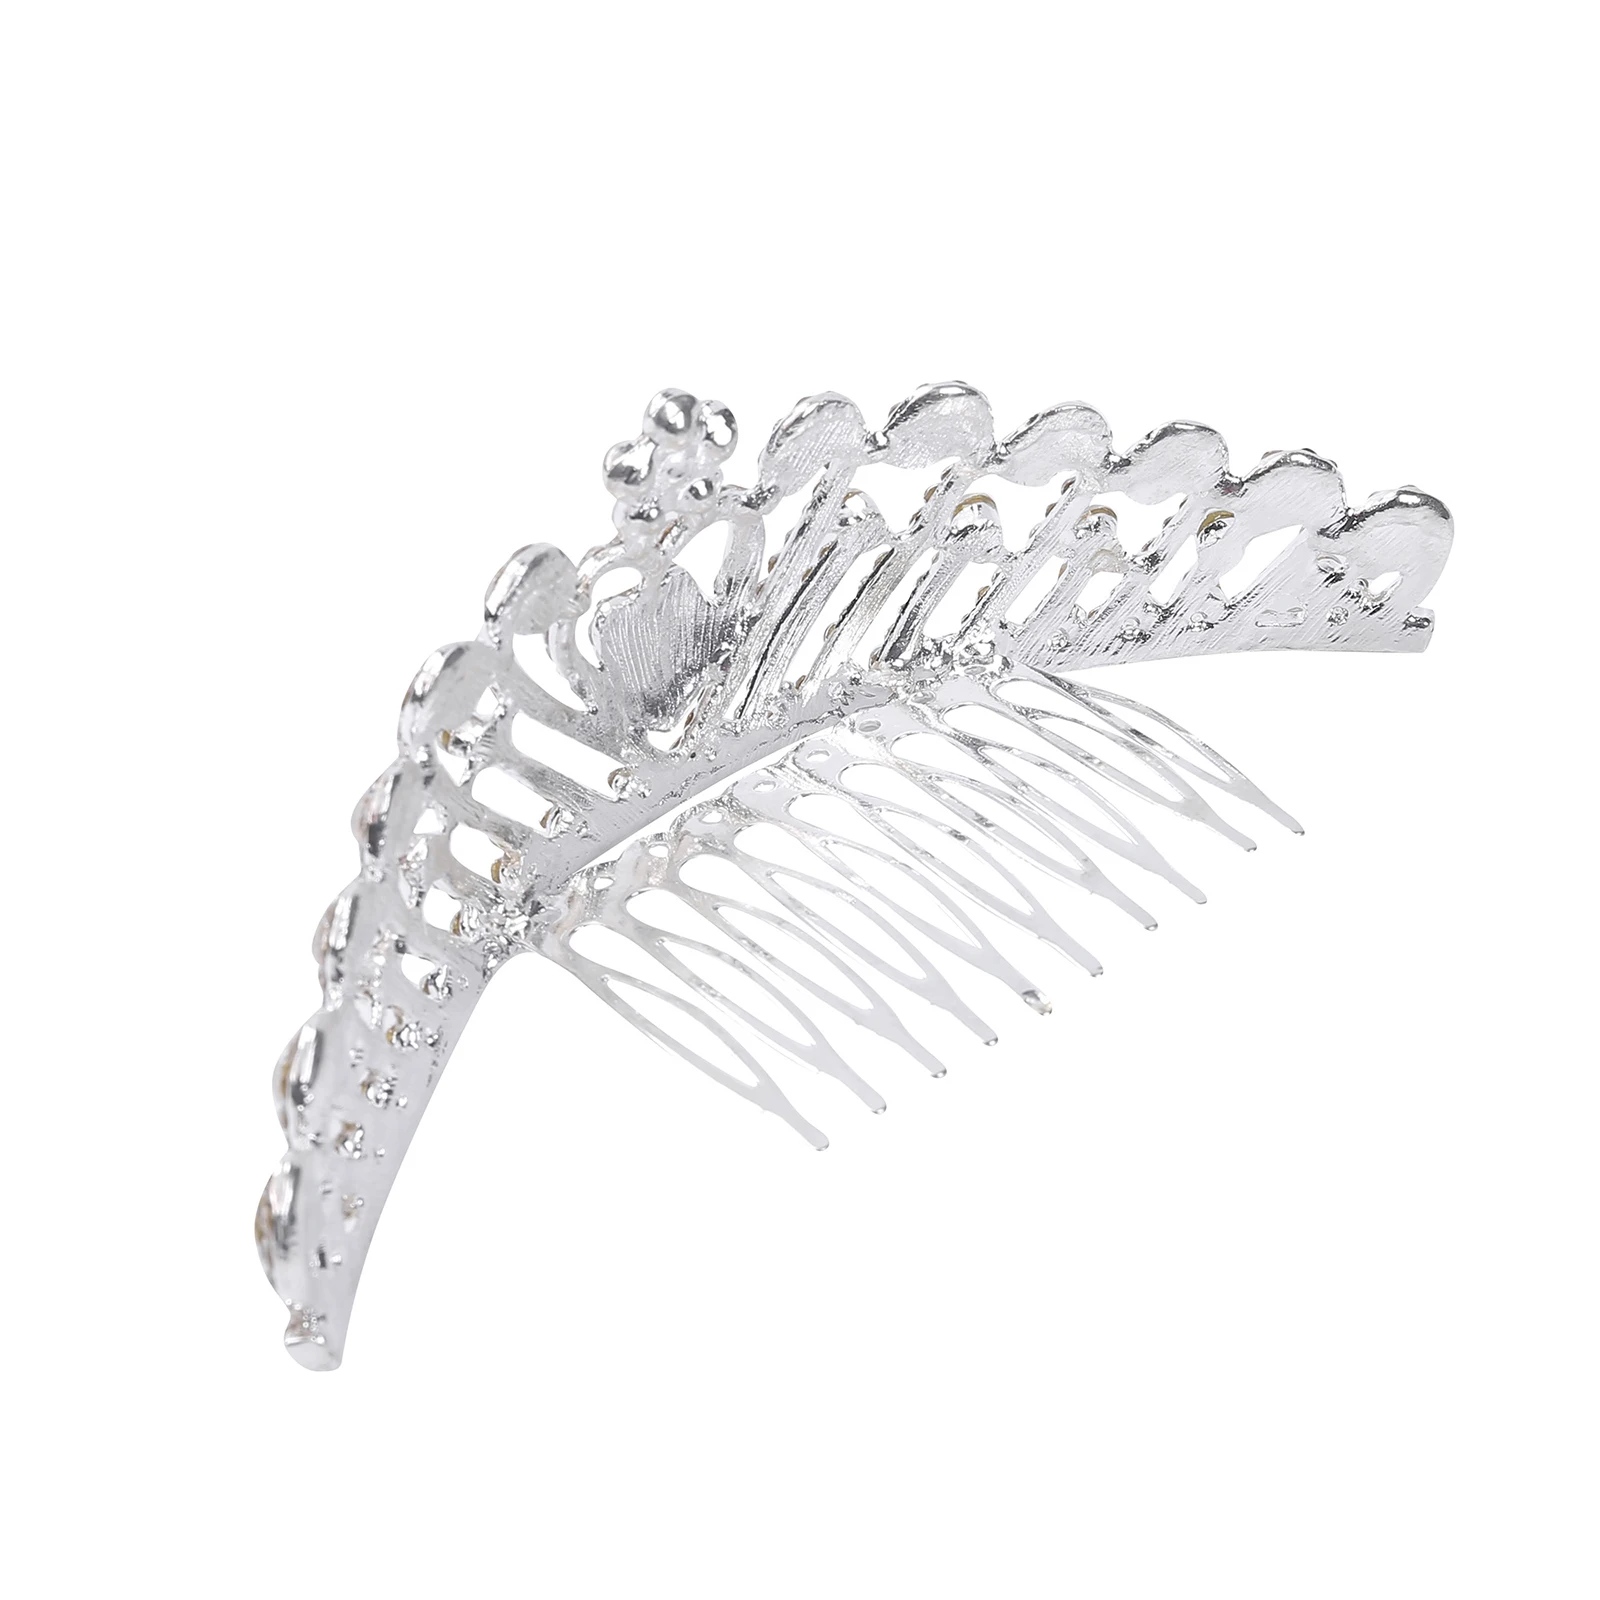 2022 Girl Head Hoop Princess Crown Design Shiny Rhinestone Inlaid Exquisite Eye-catching Head Jewelry Headband Party Headwear baby accessories coloring pages	